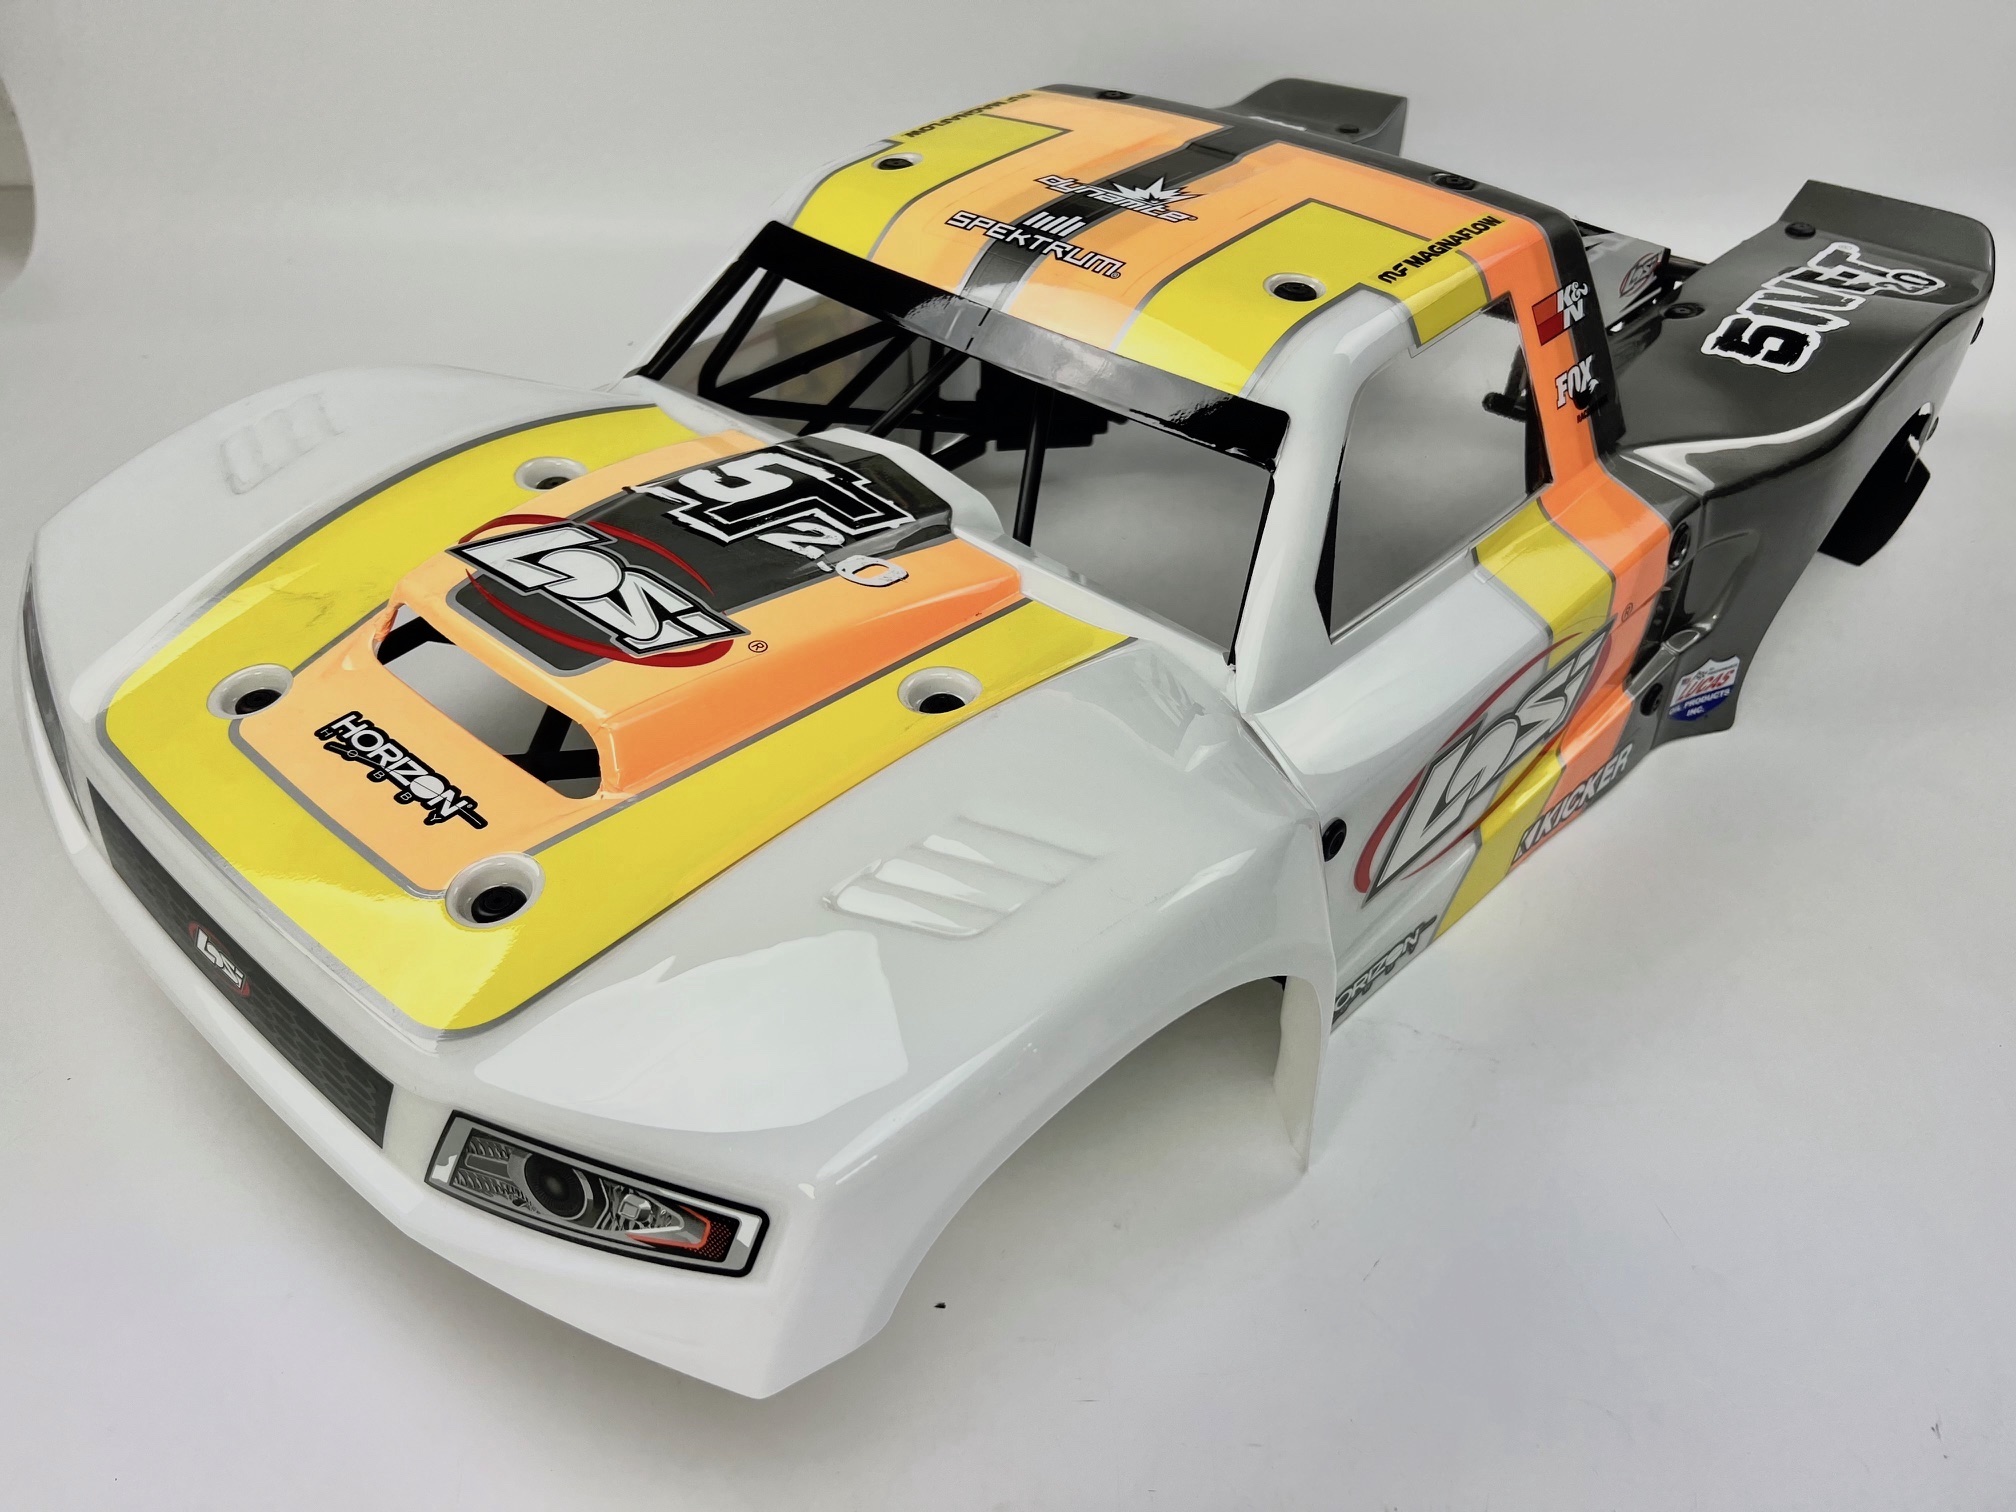 Original Losi 5ive-T T2 Orange 2.0 body kit, with paint defects